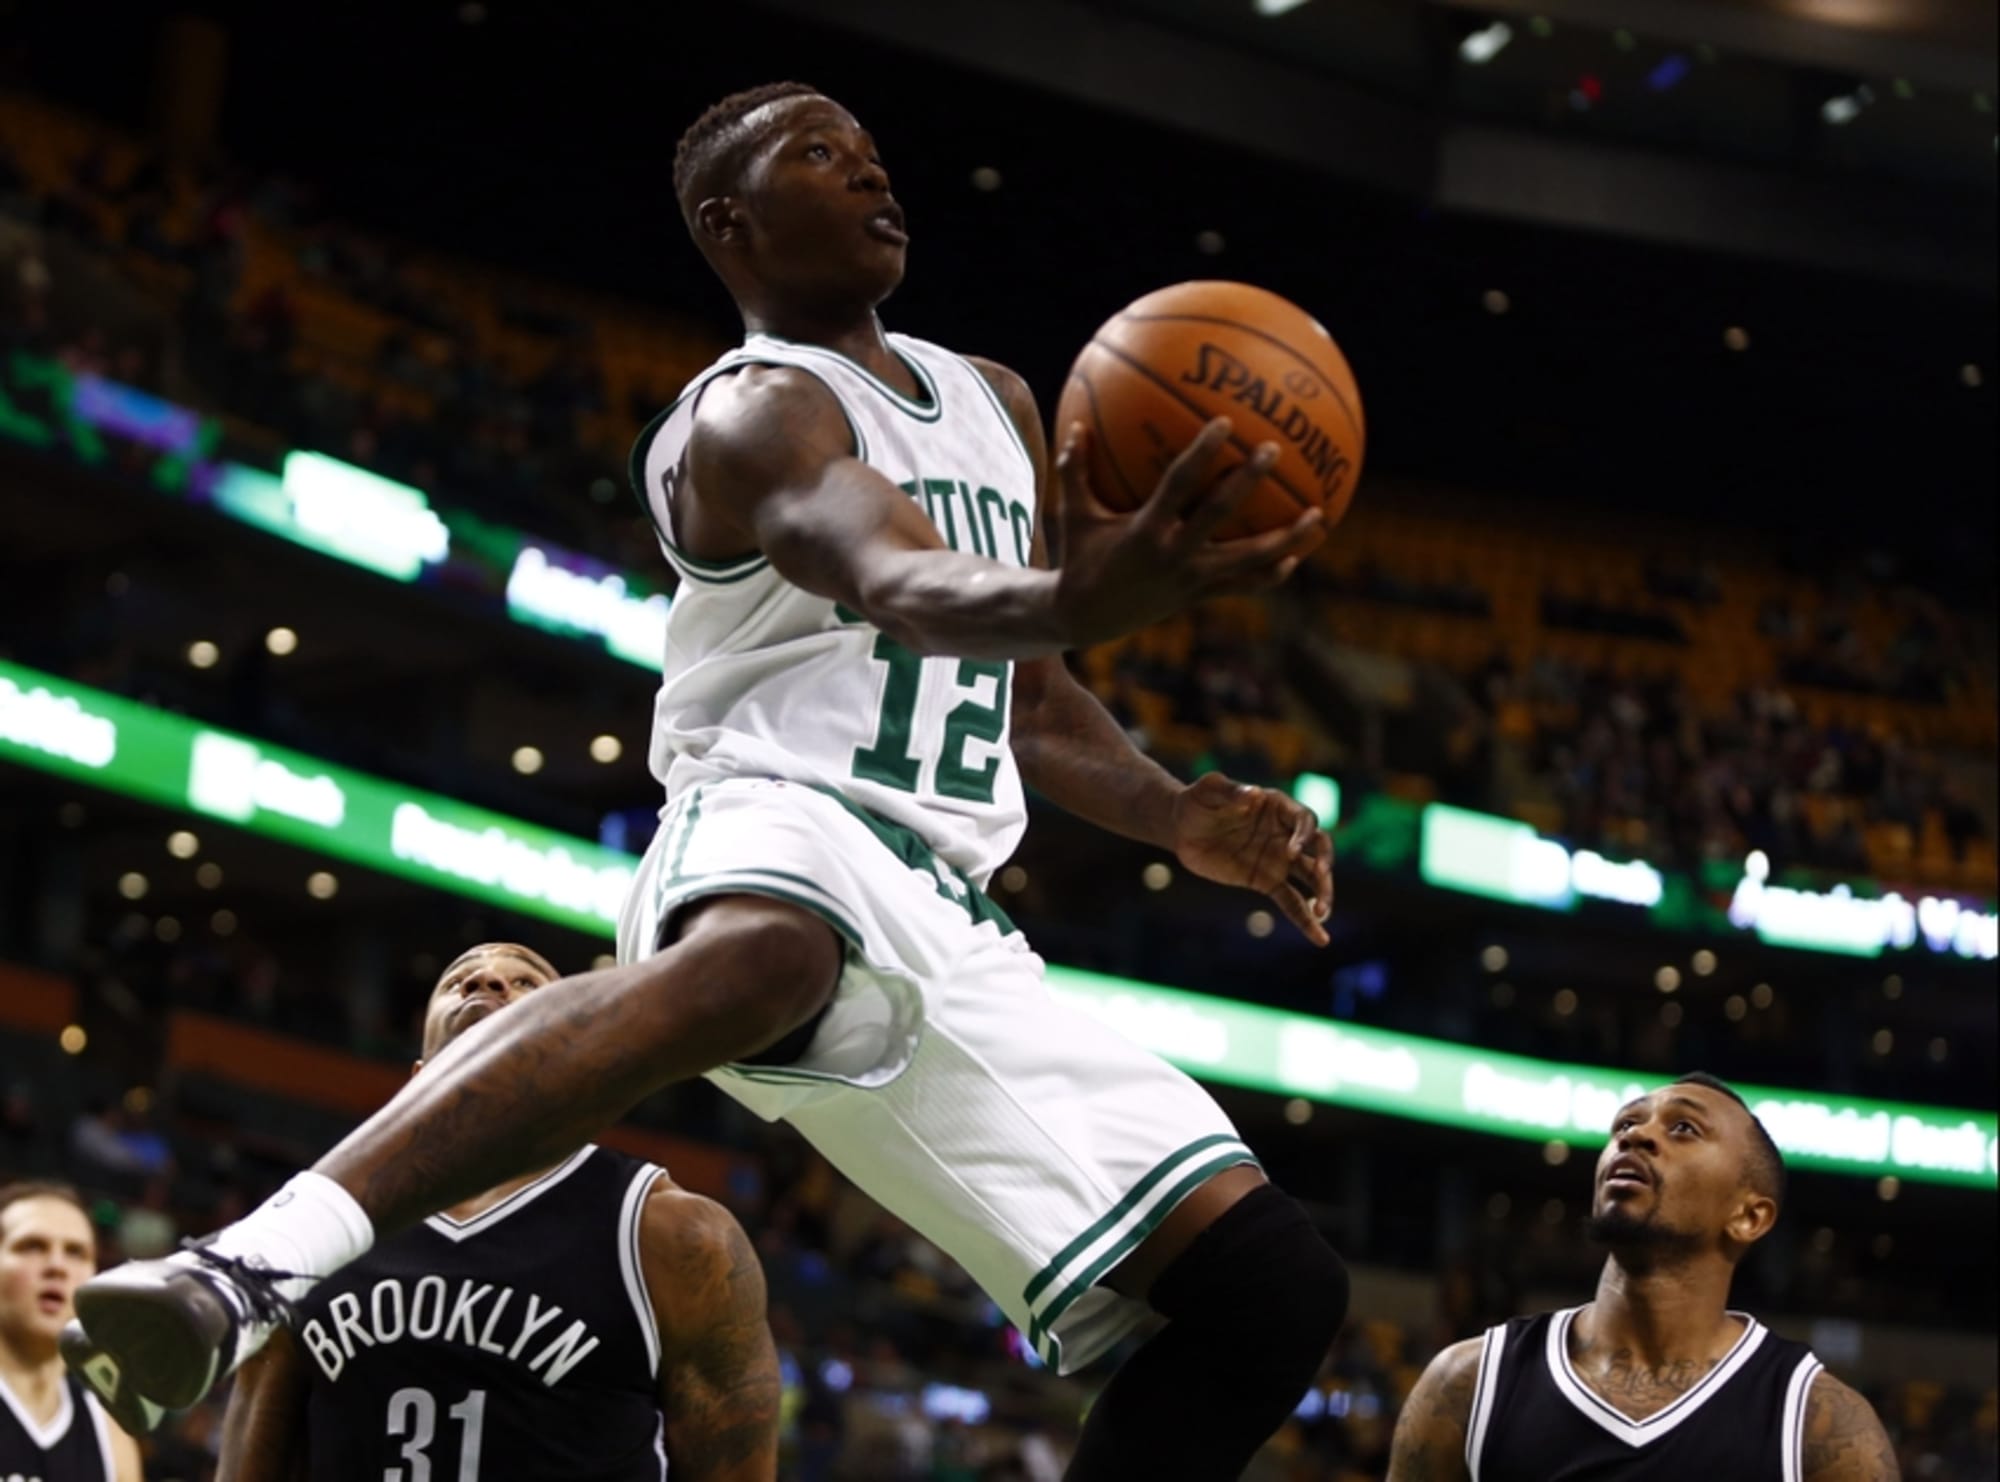 Terry Rozier scooped the Celtics NBA draft pick live on-air